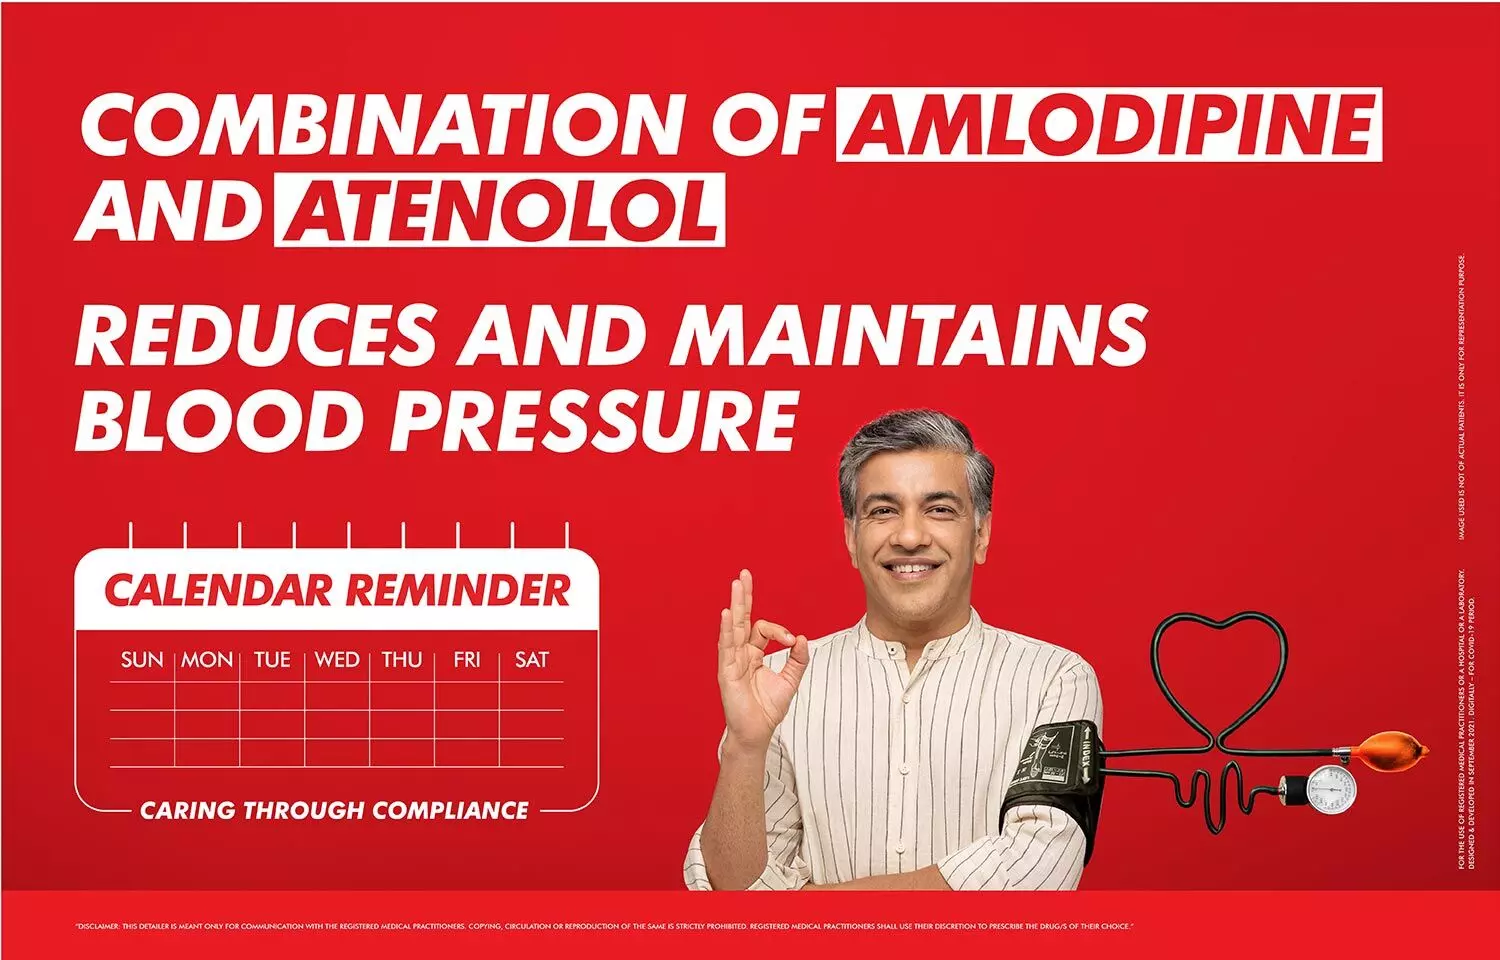 Reviewing the triple A in cardiology: The role of amlodipine-atenolol in angina relief